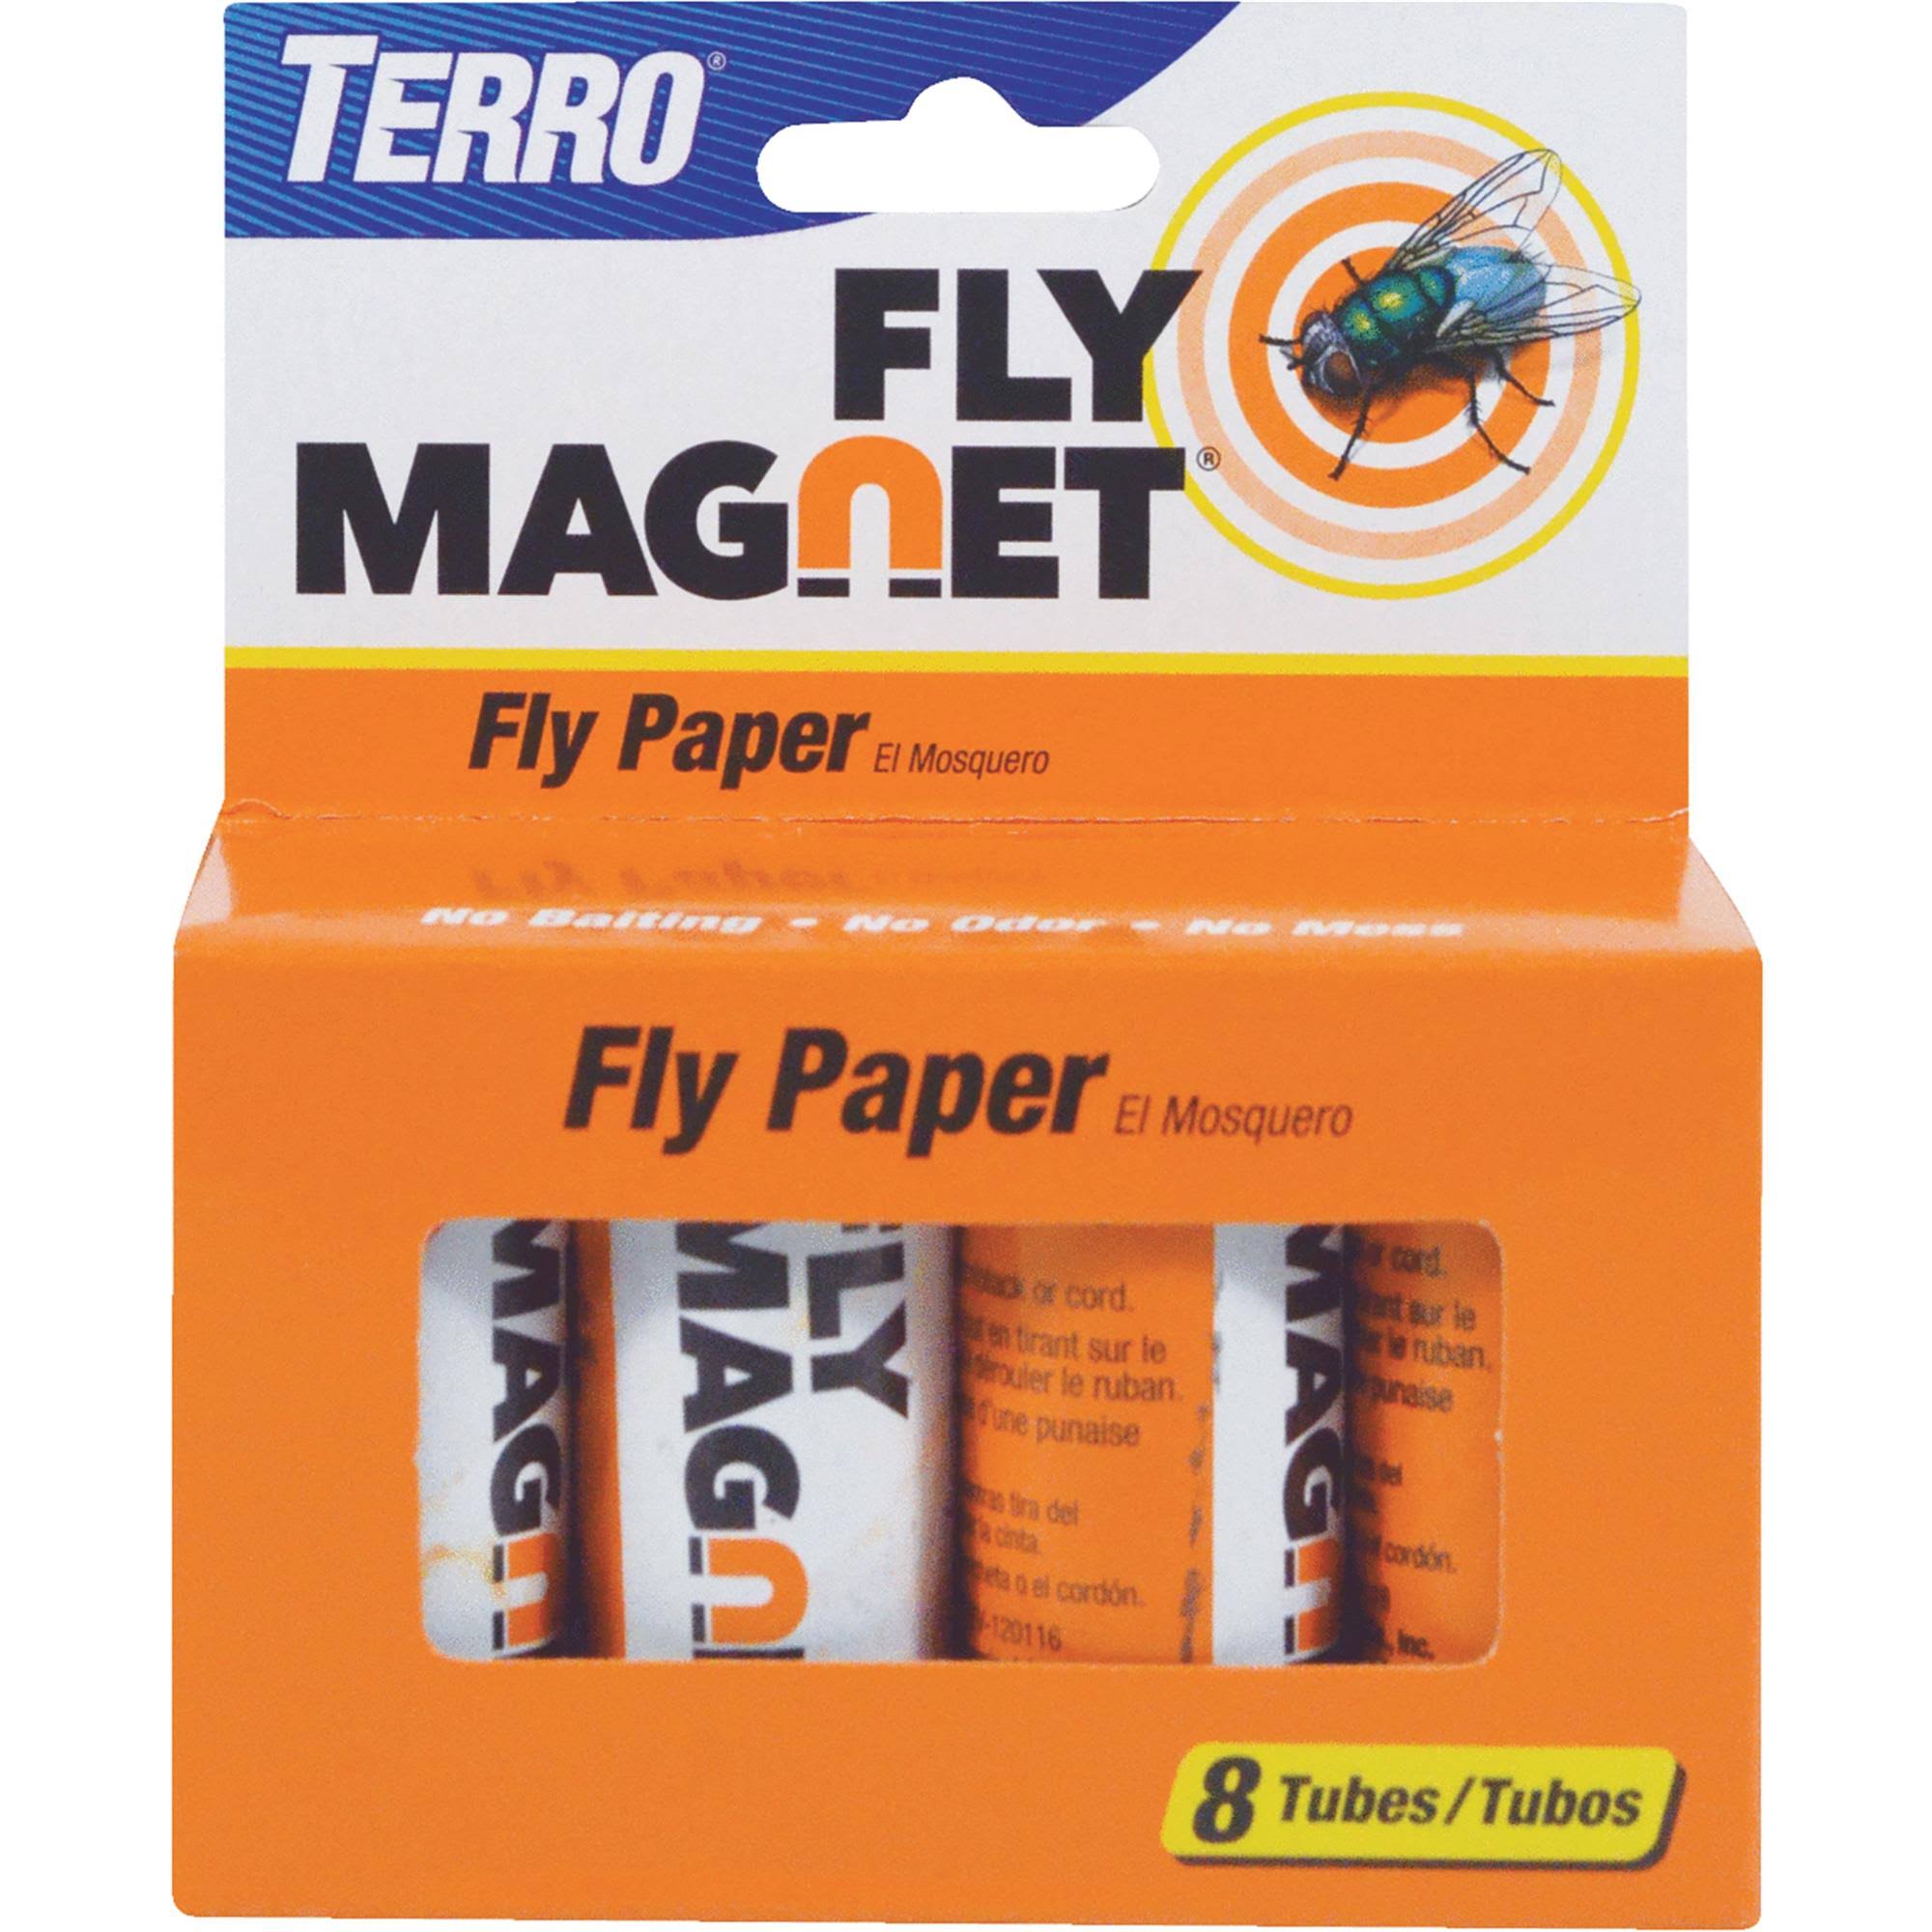 Terro T518 Fly Magnet Sticky Fly Paper Fly Trap, 8 Count (Pack of 1)